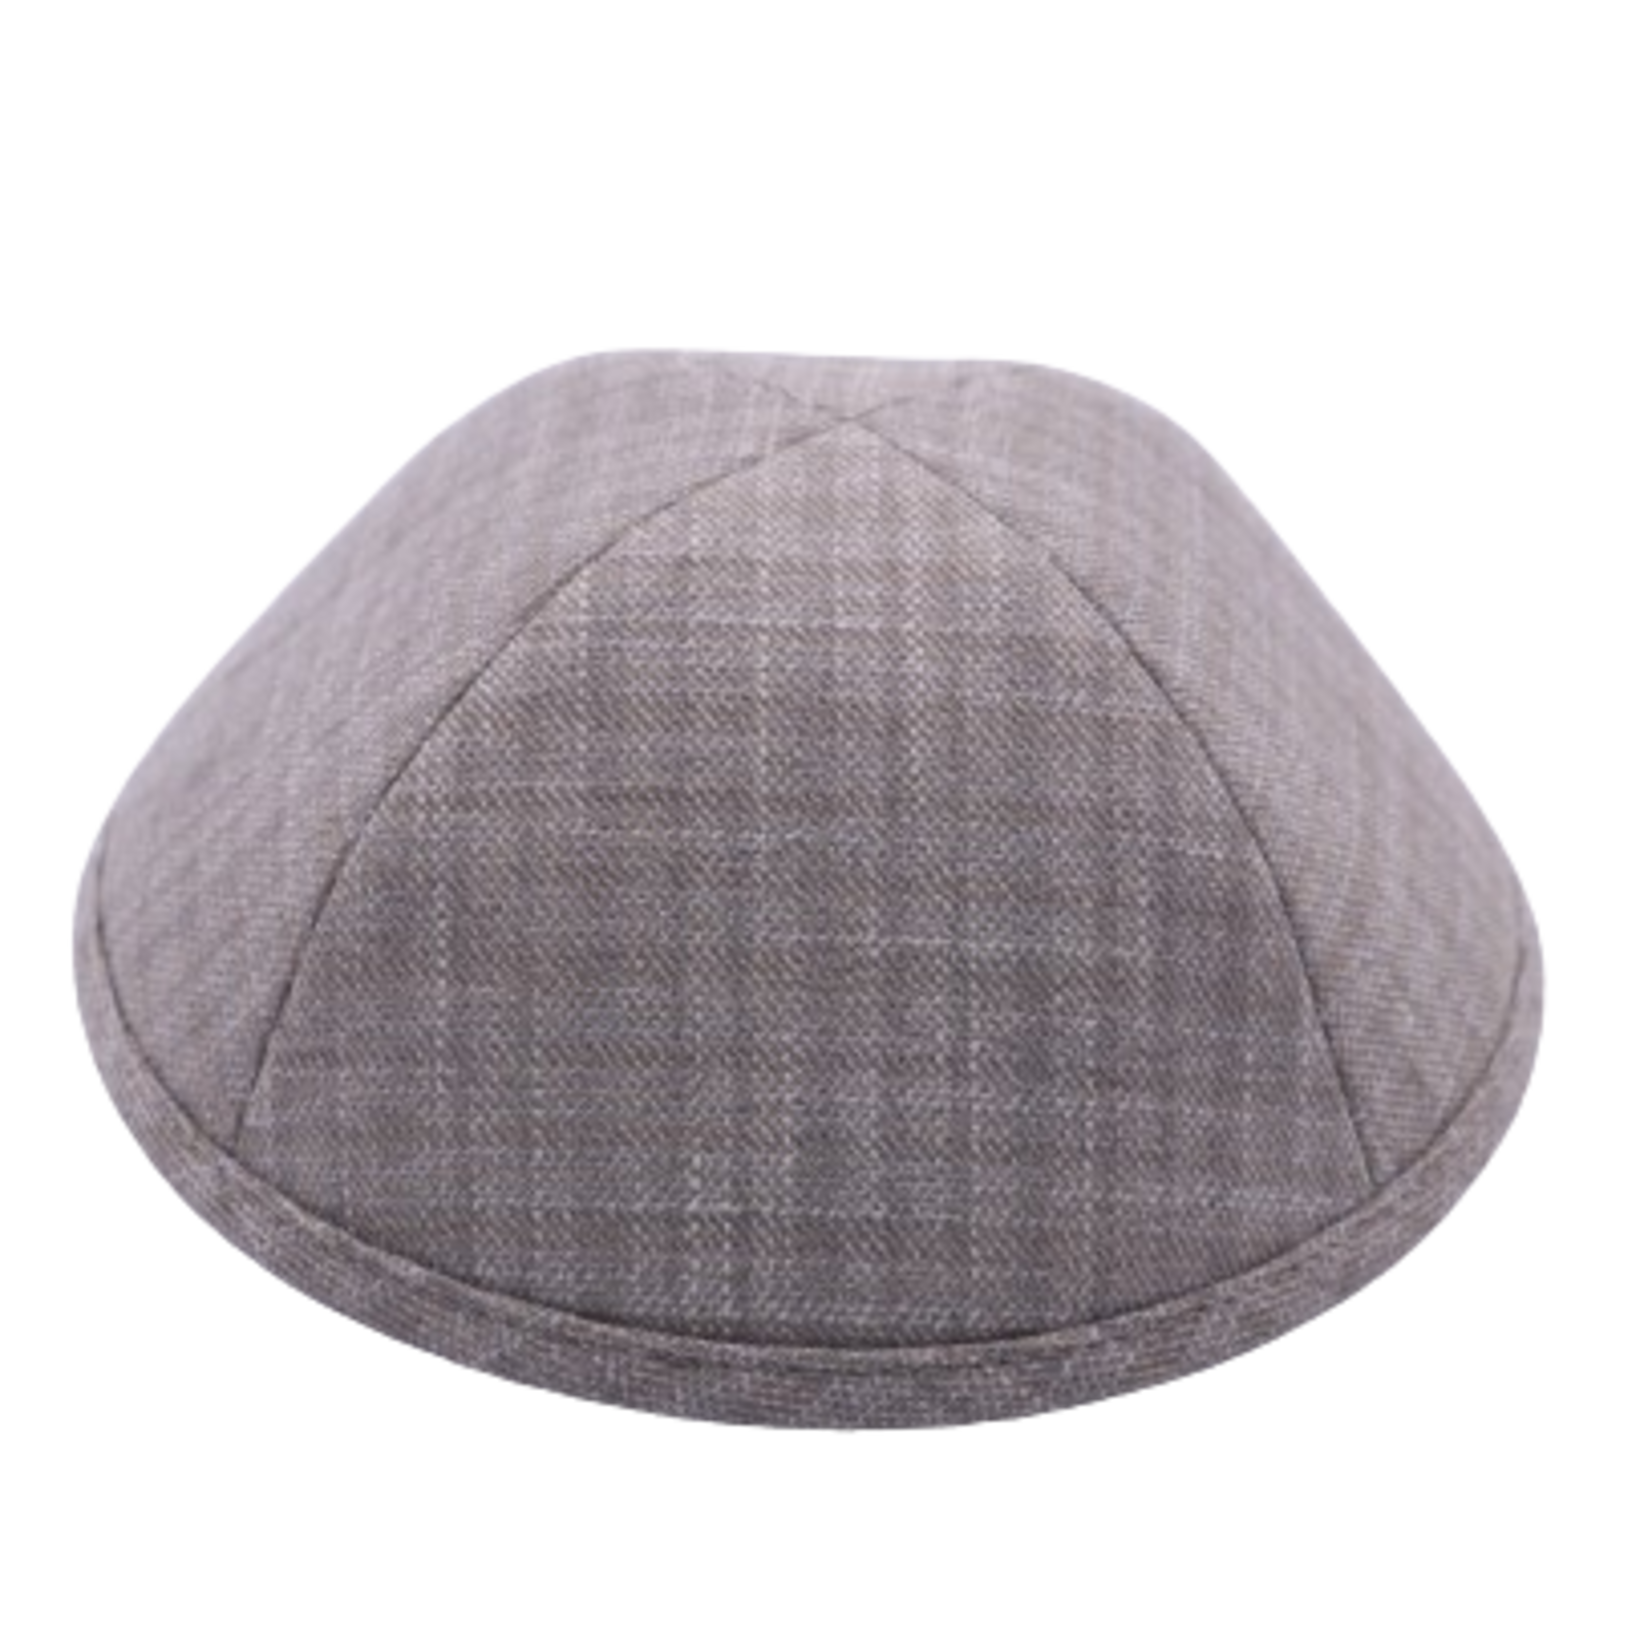 Coolkippahs Suit Beige Check with Clips